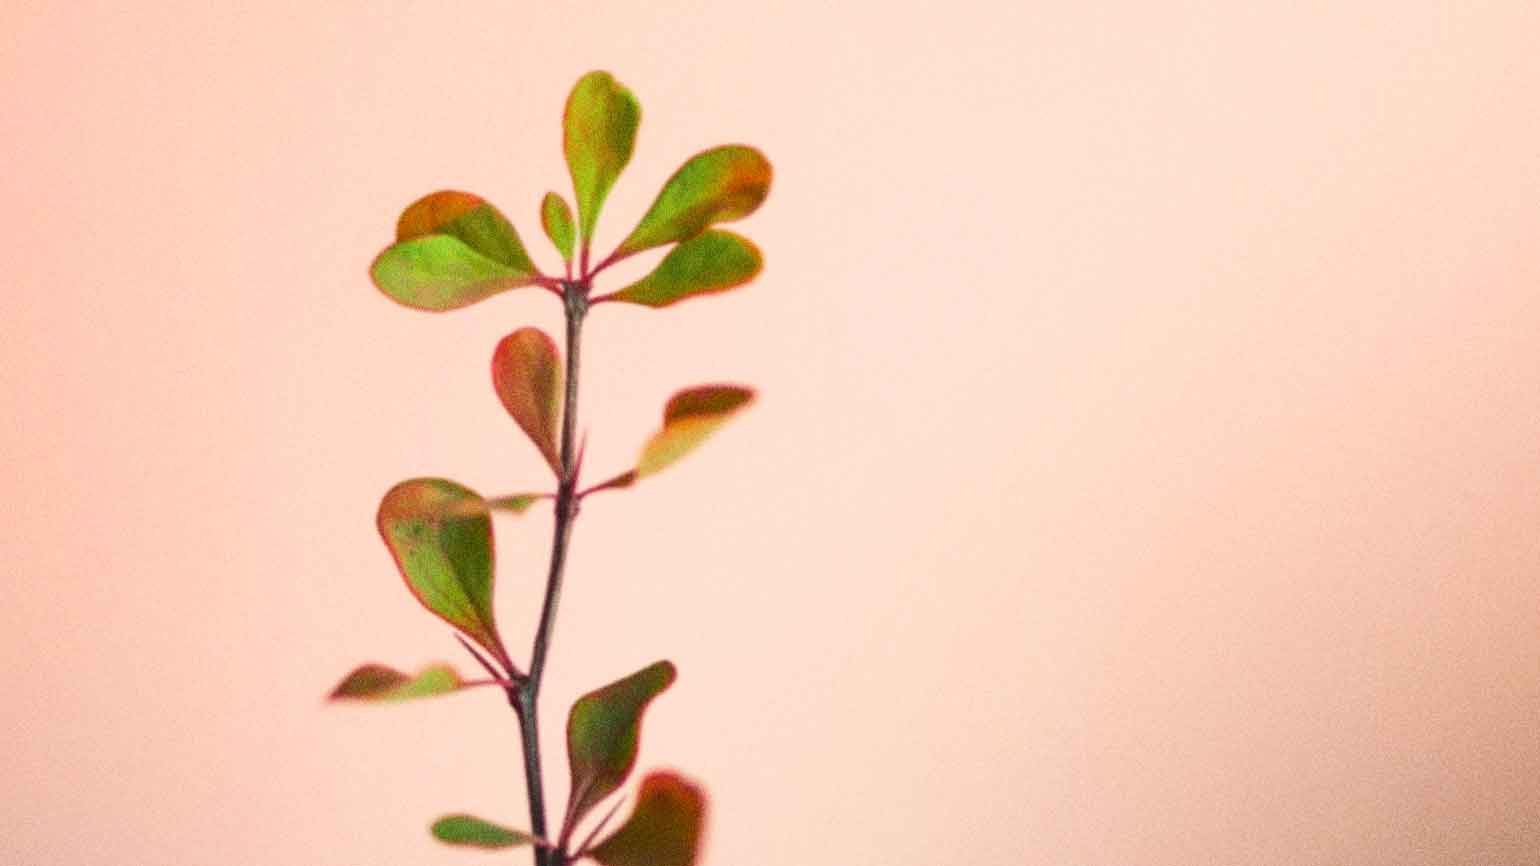 A plant growing against a pink background to remind you of your goals and God.